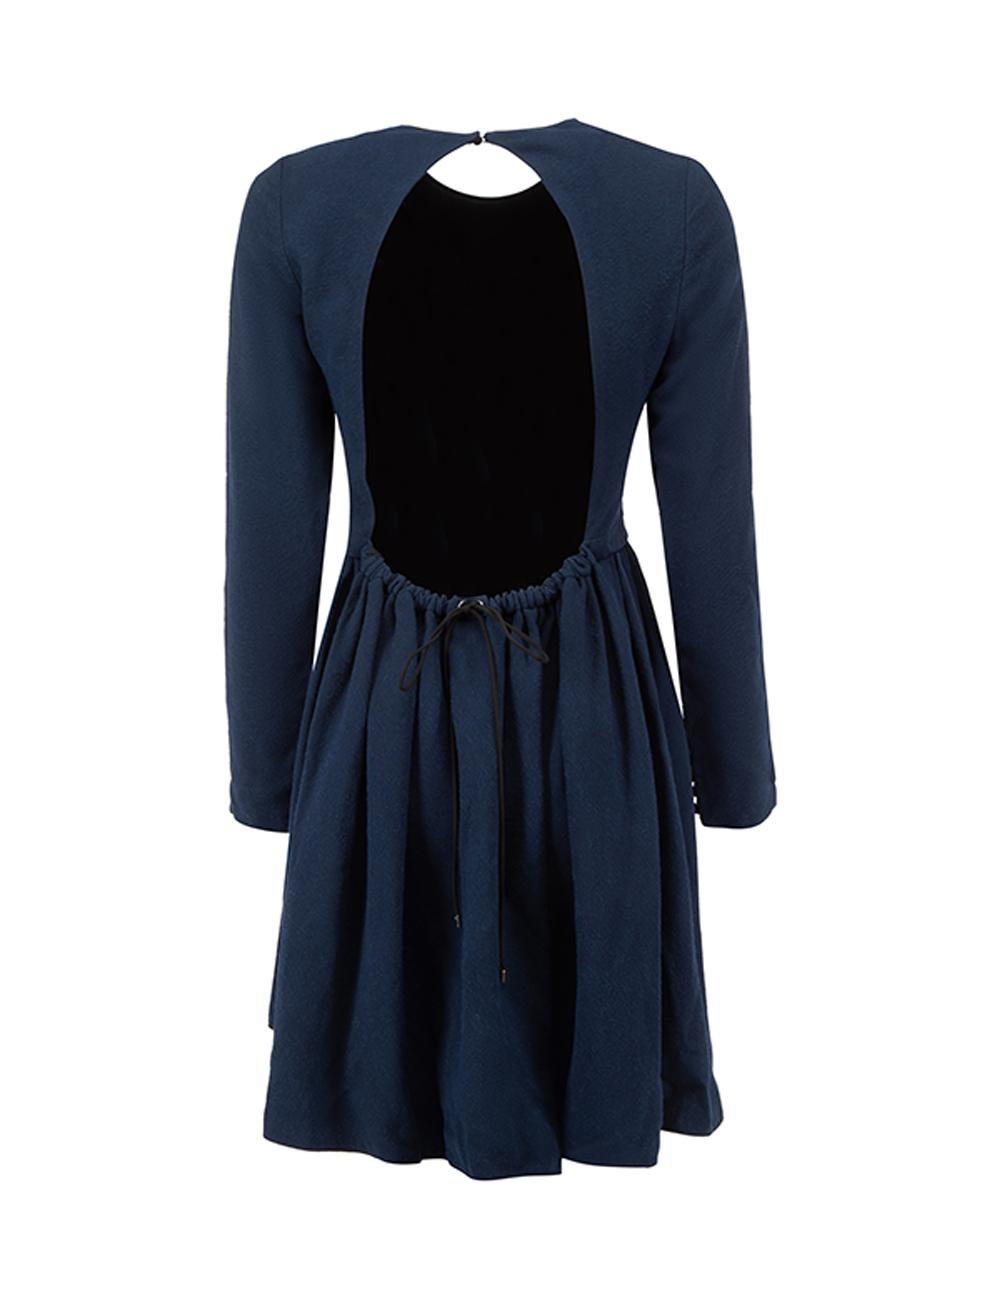 Victoria Beckham Women's Navy Backless Mini Dress In Excellent Condition For Sale In London, GB